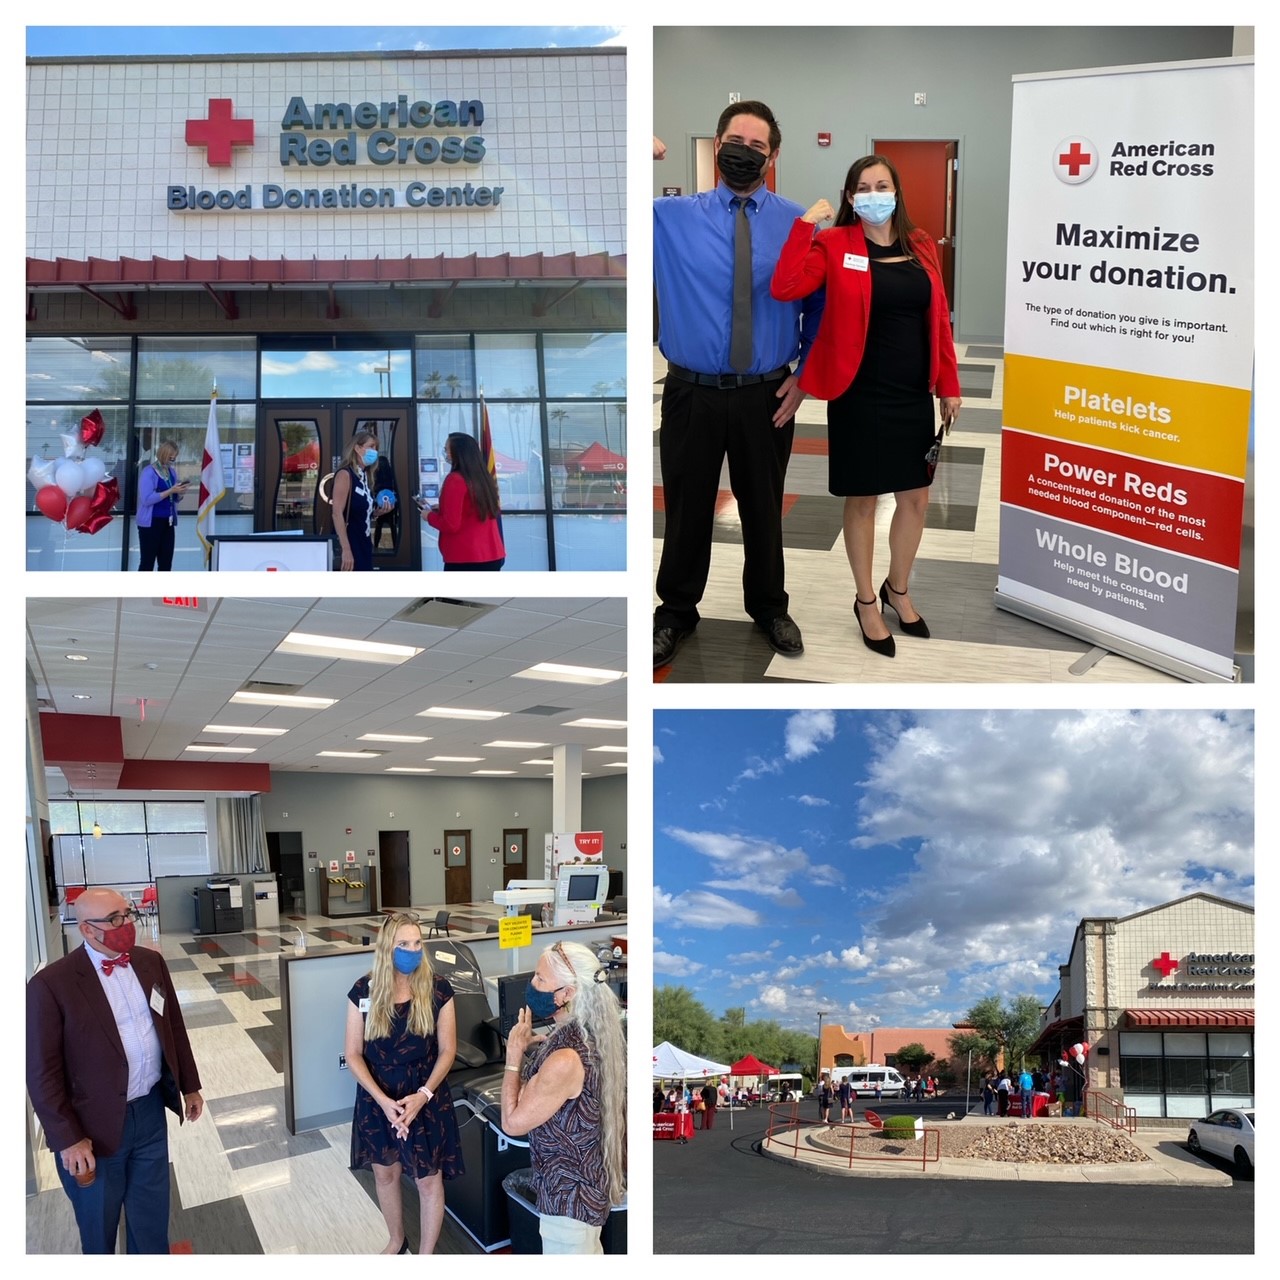 UArizona Pathology on Twitter: "The need for life-saving blood is constant. ❤ Please donate--the new American Red Cross donation center in Tucson is waiting for you! #DonateBlood #Tucson @RedCross @aabb @BannerUnivMed